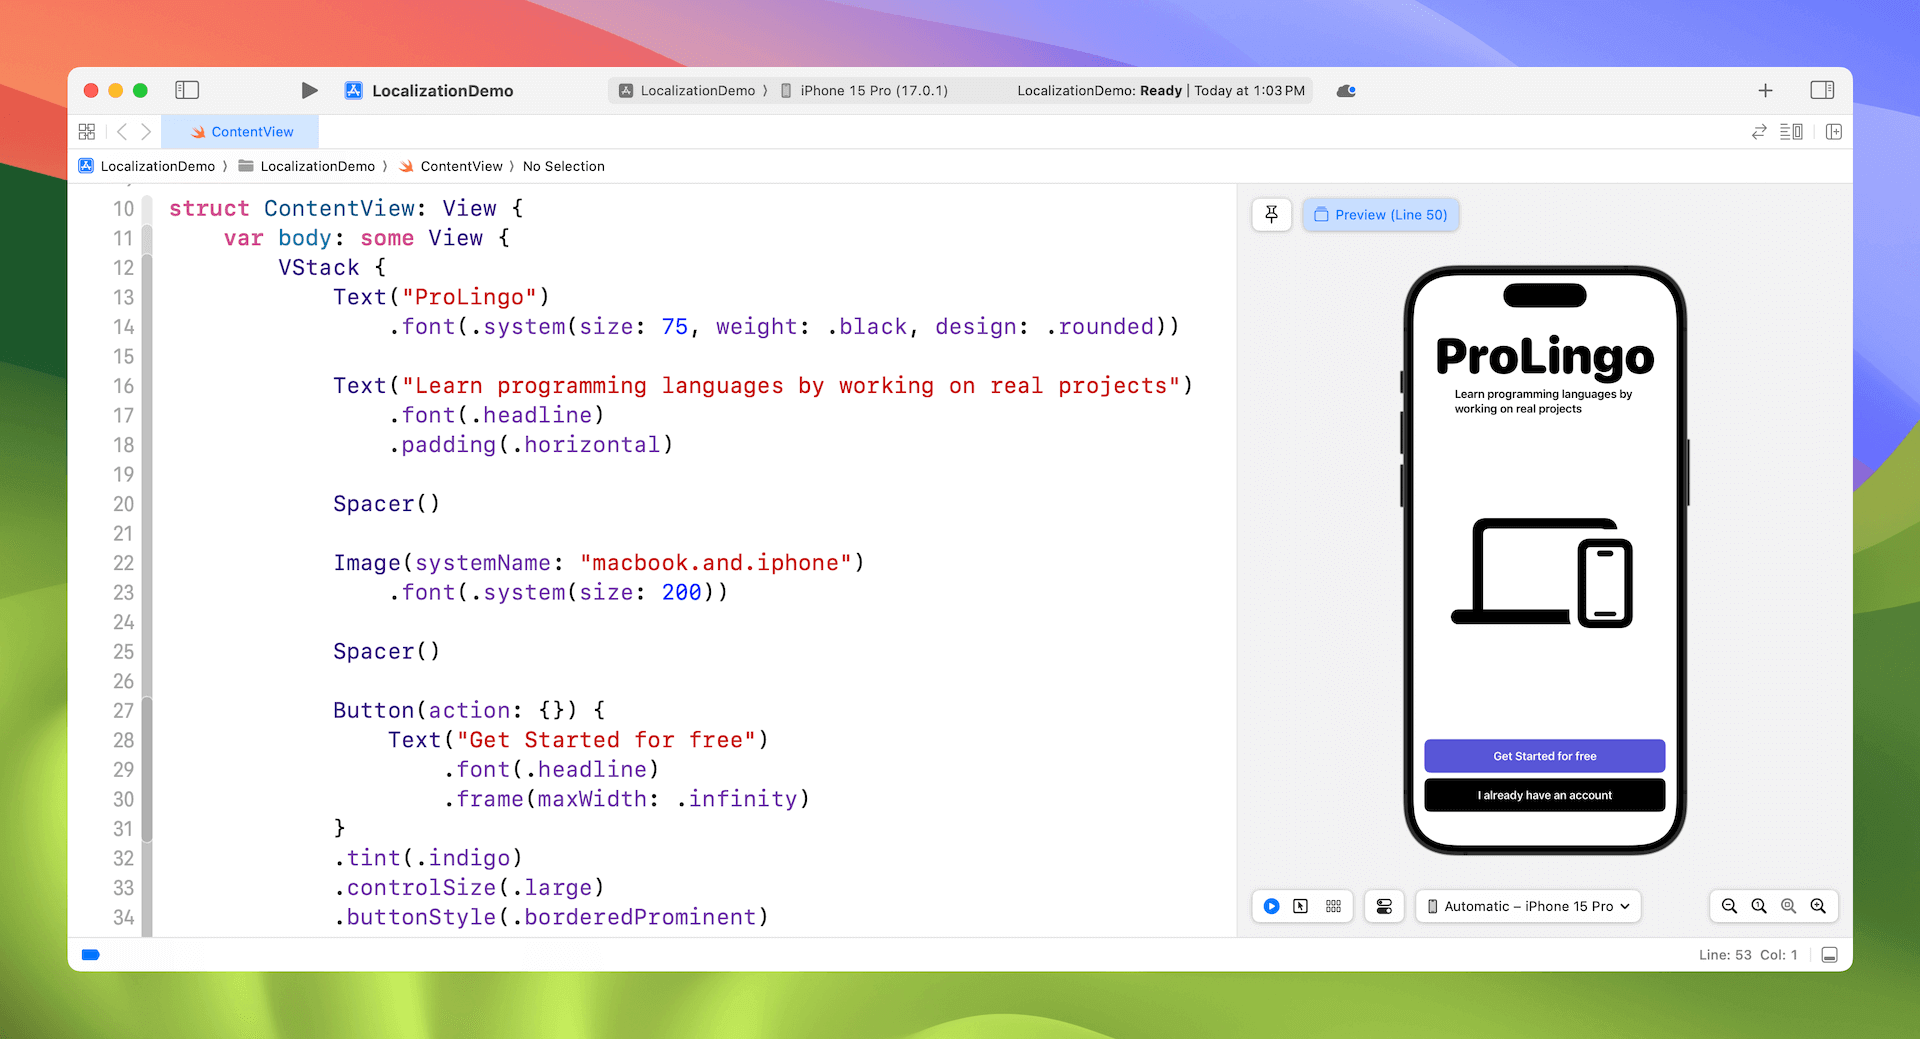 swiftui-string-catalogs-demo-project